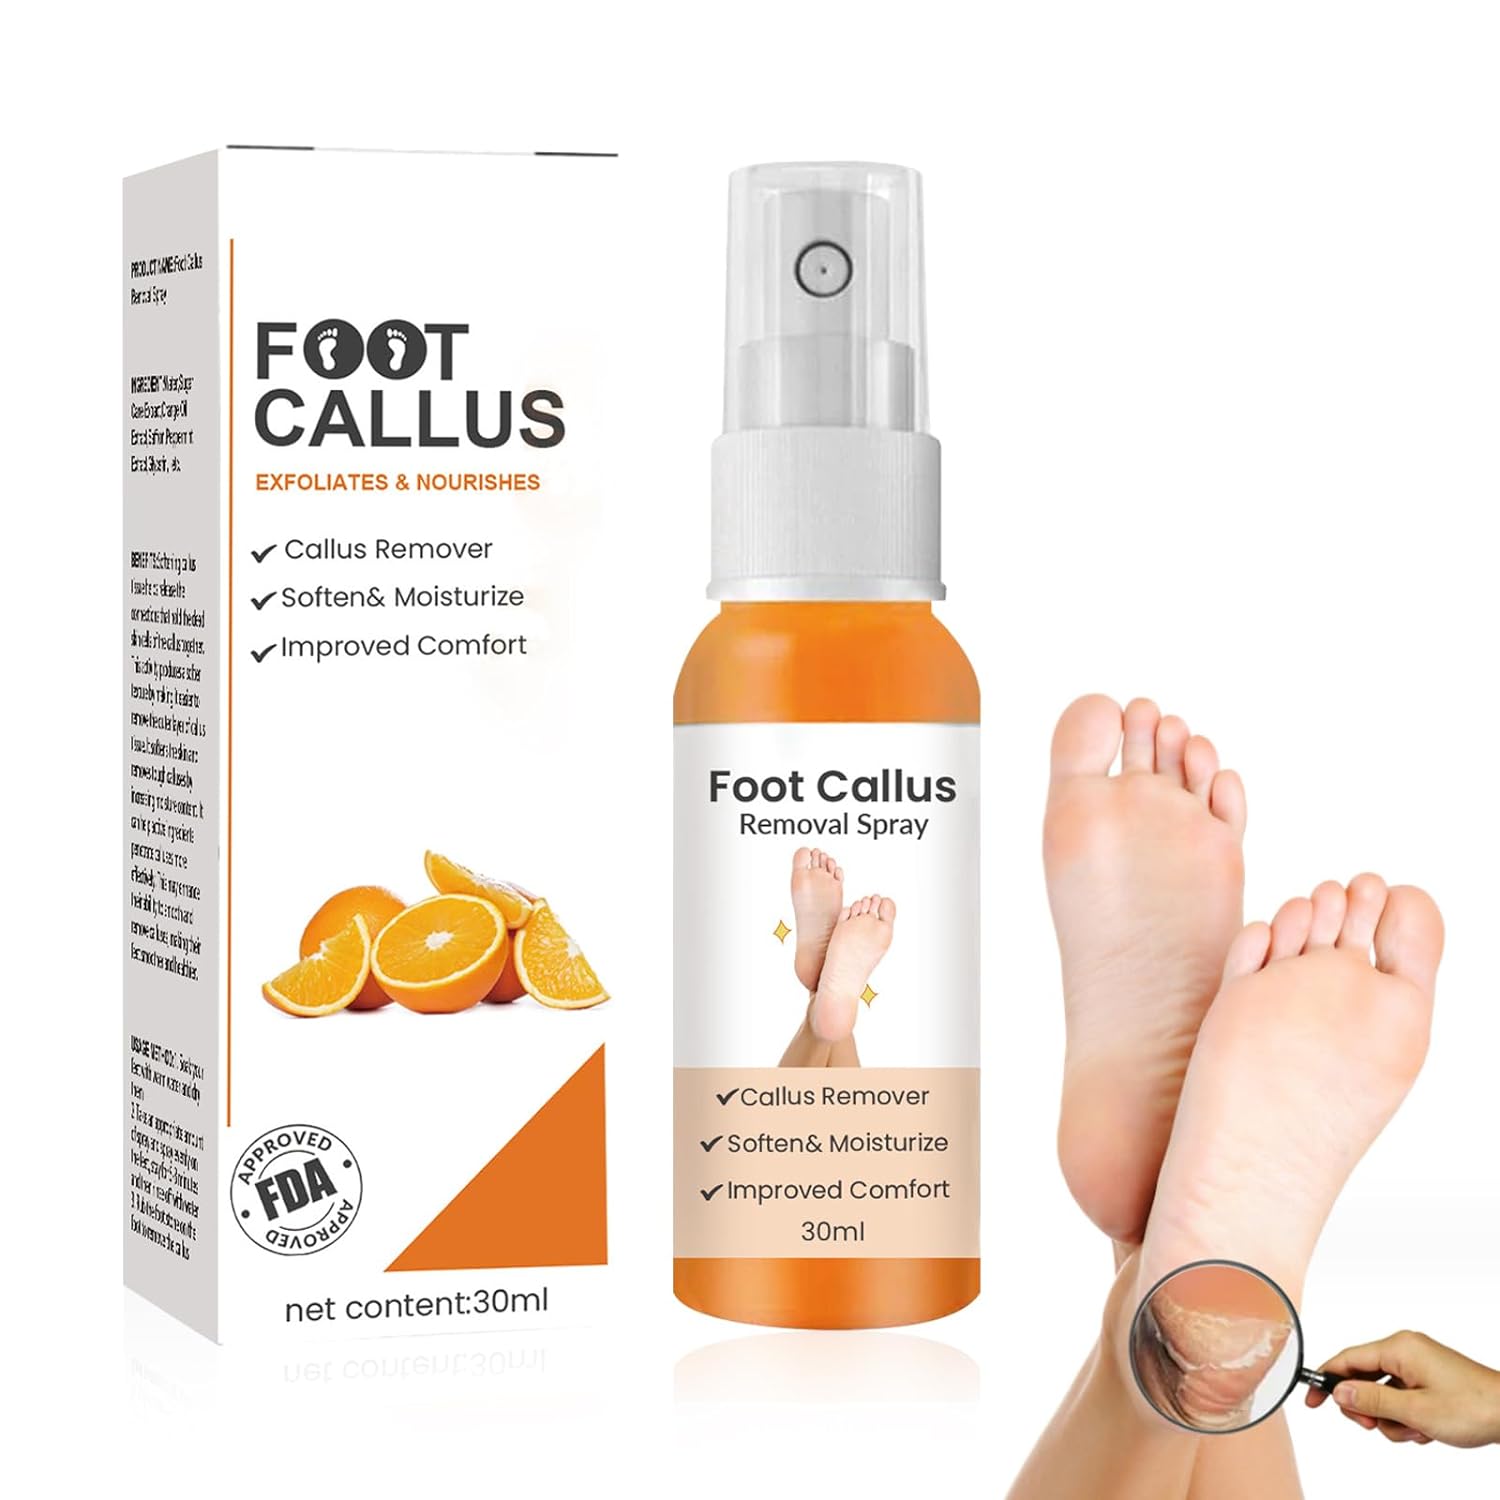 Foot peeling spray, foot peeling callus removal, callus remover spray, for quick care of feet, skin and calluses on the feet